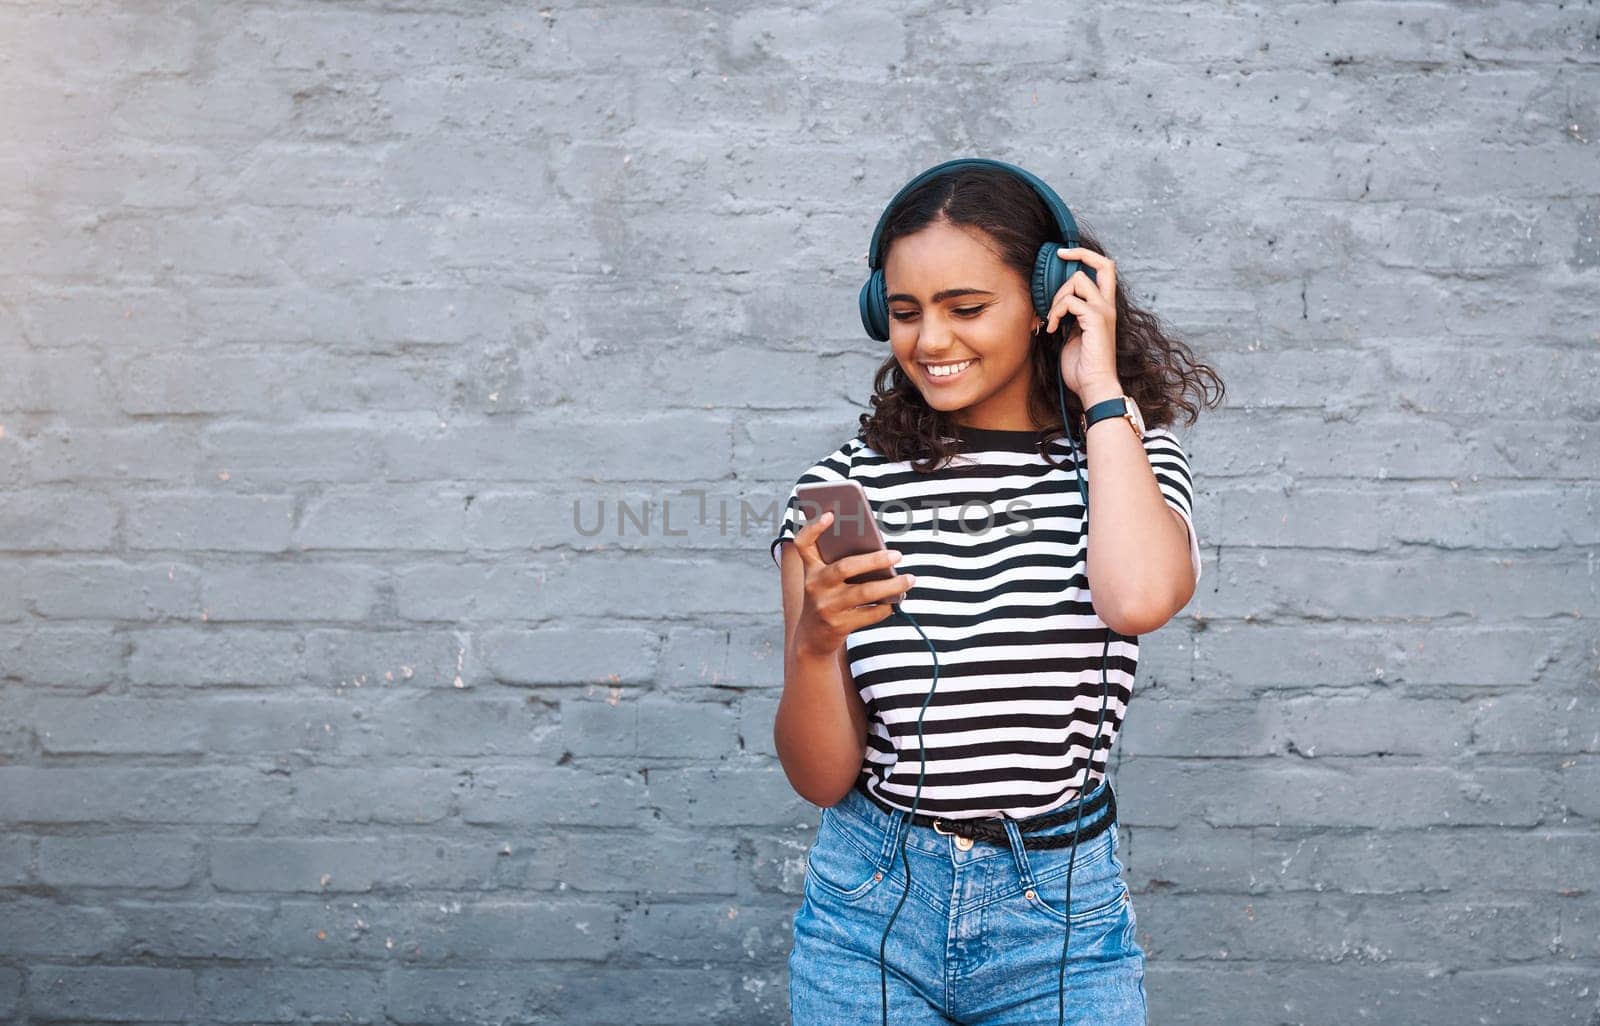 Girl, headphones and cellphone with wall background for music listening, subscription or podcast. Female person, smile and urban city with technology for entertainment with playlist, app or mockup.